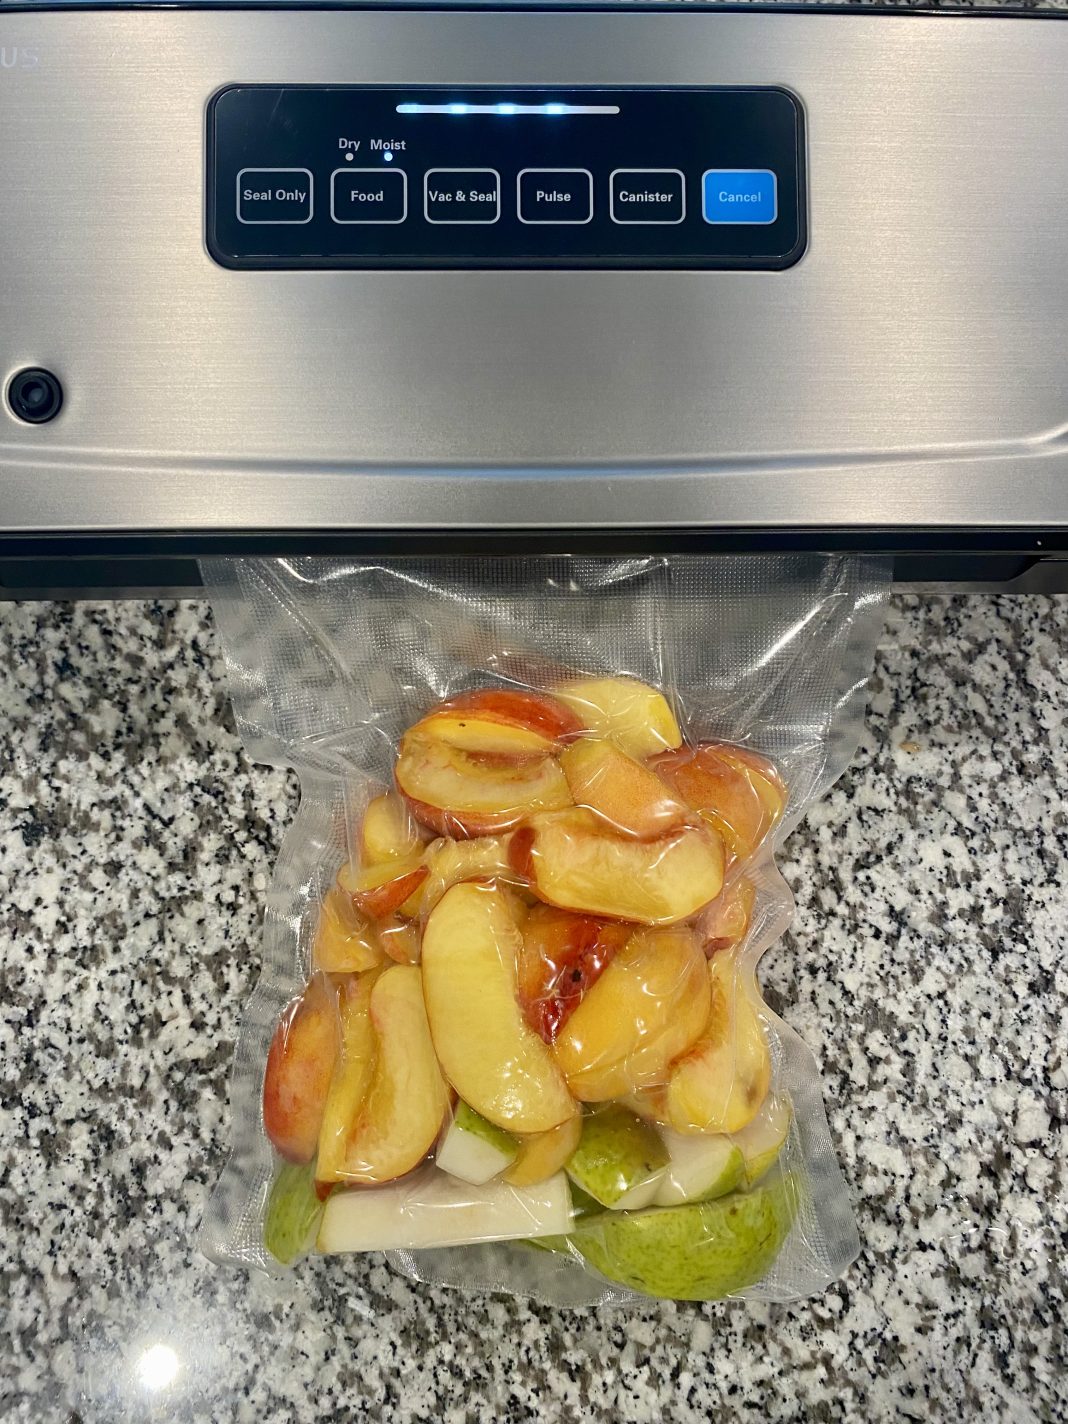 INKBIRD plus vacuum sealer and a sealed bag of fresh produce from the farmer's market